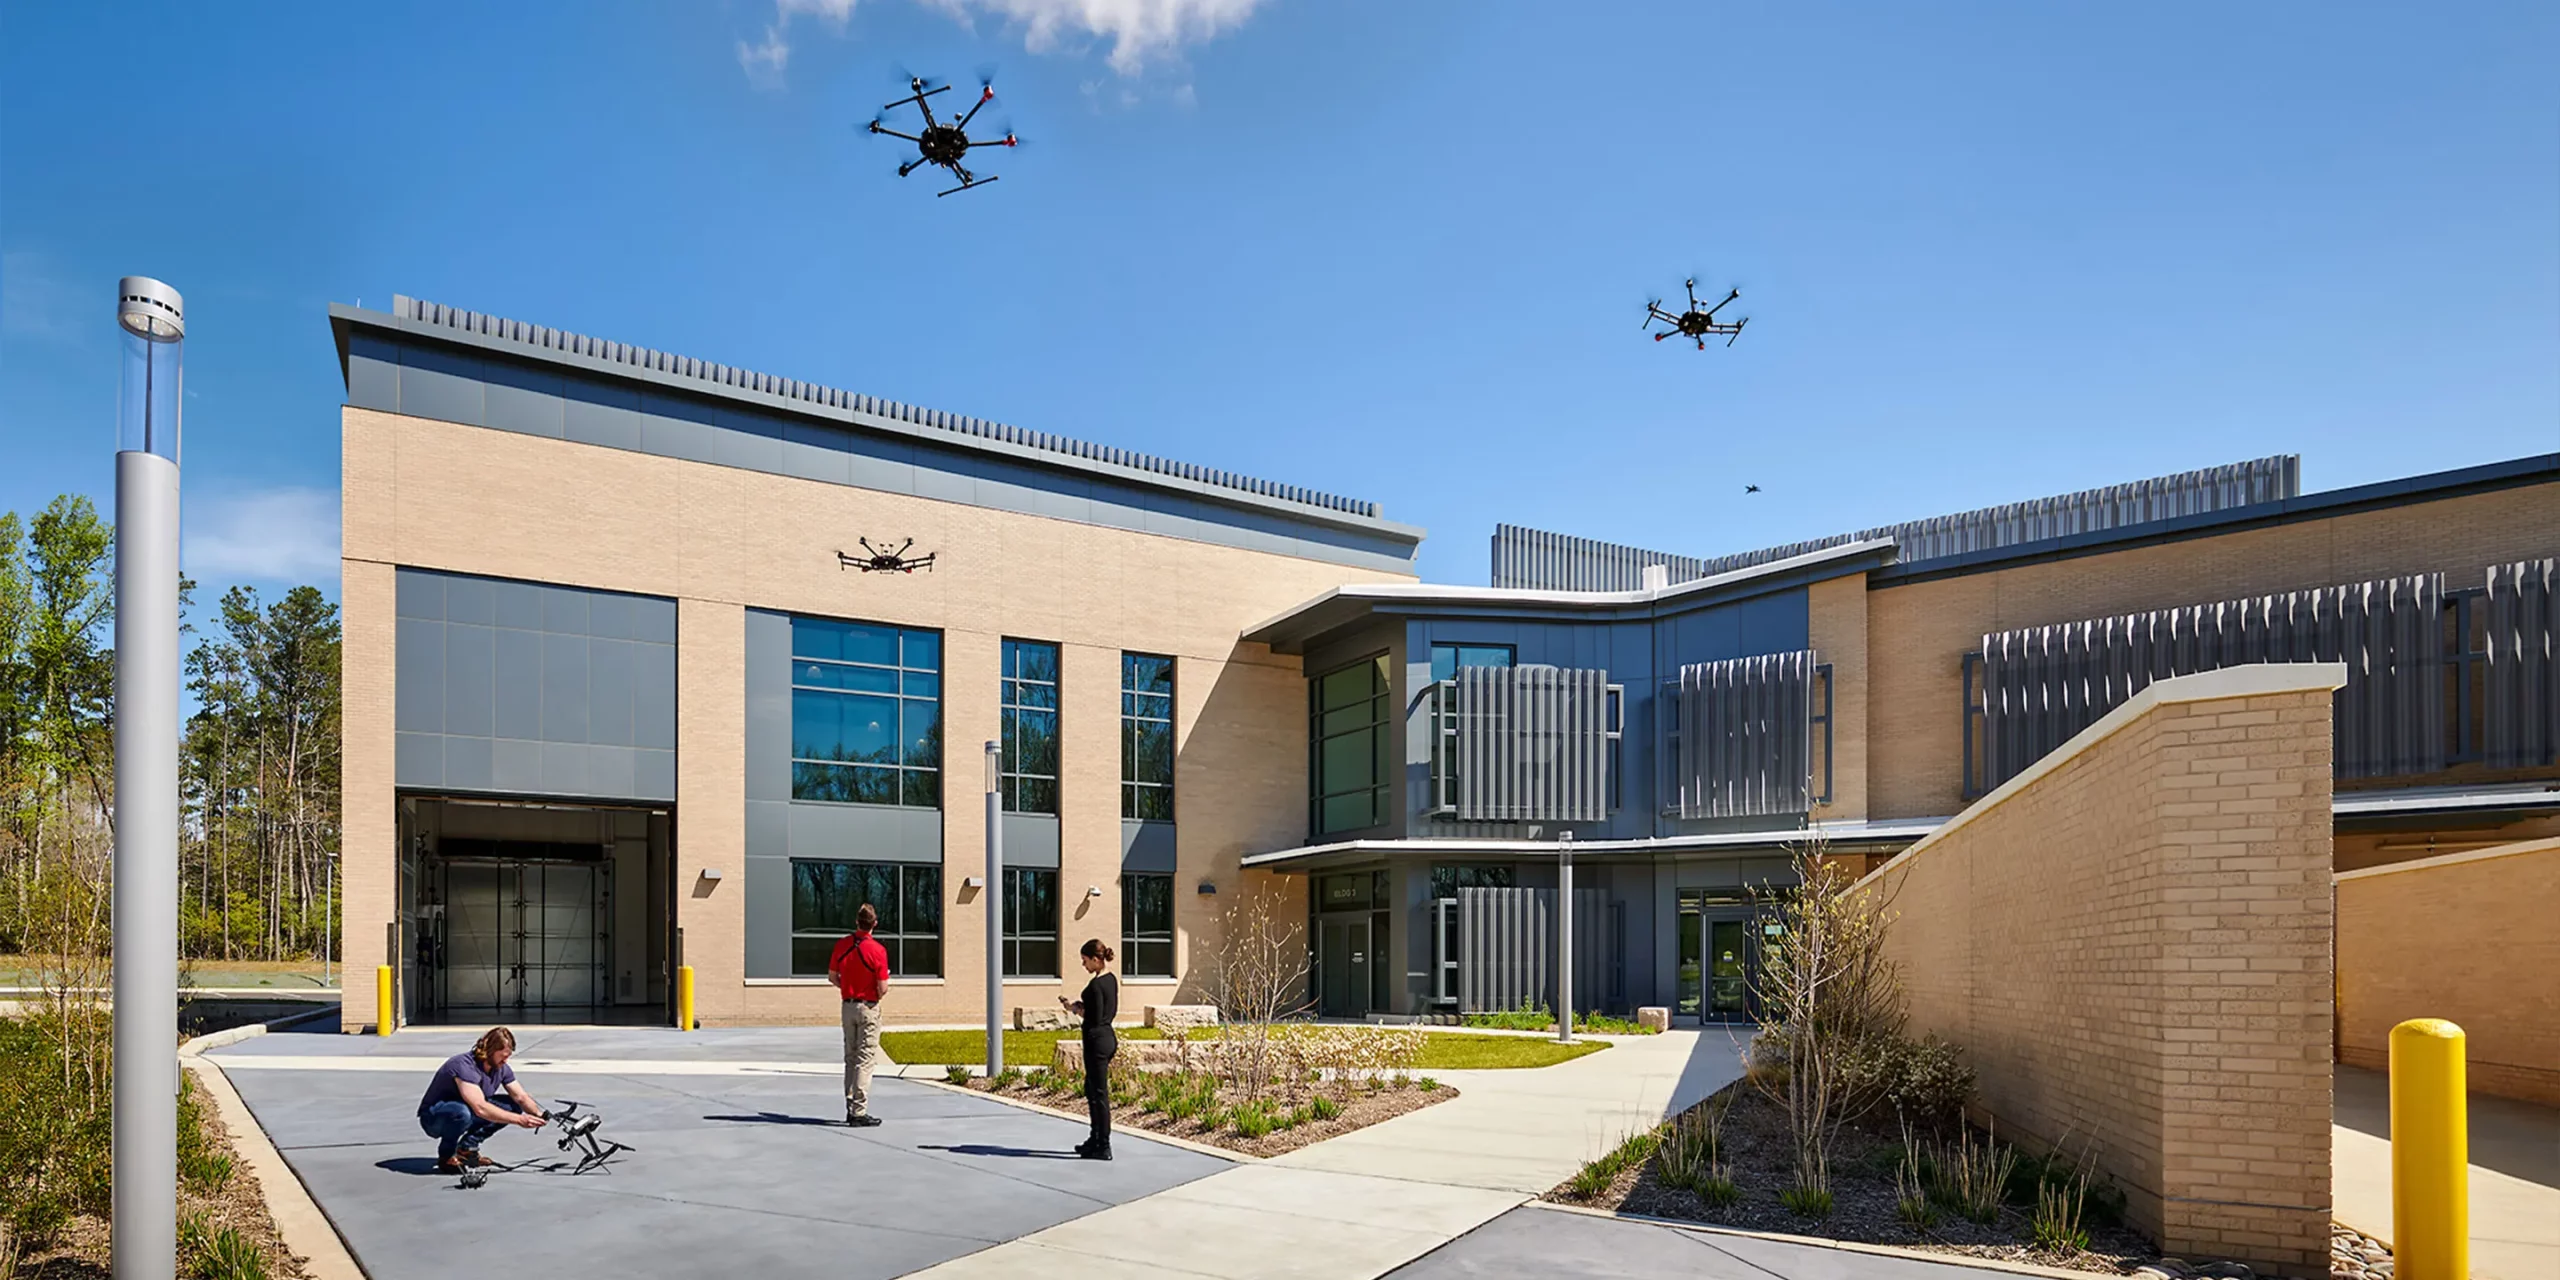 Autonomous Research and Technology Building Exterior, Flying Drones